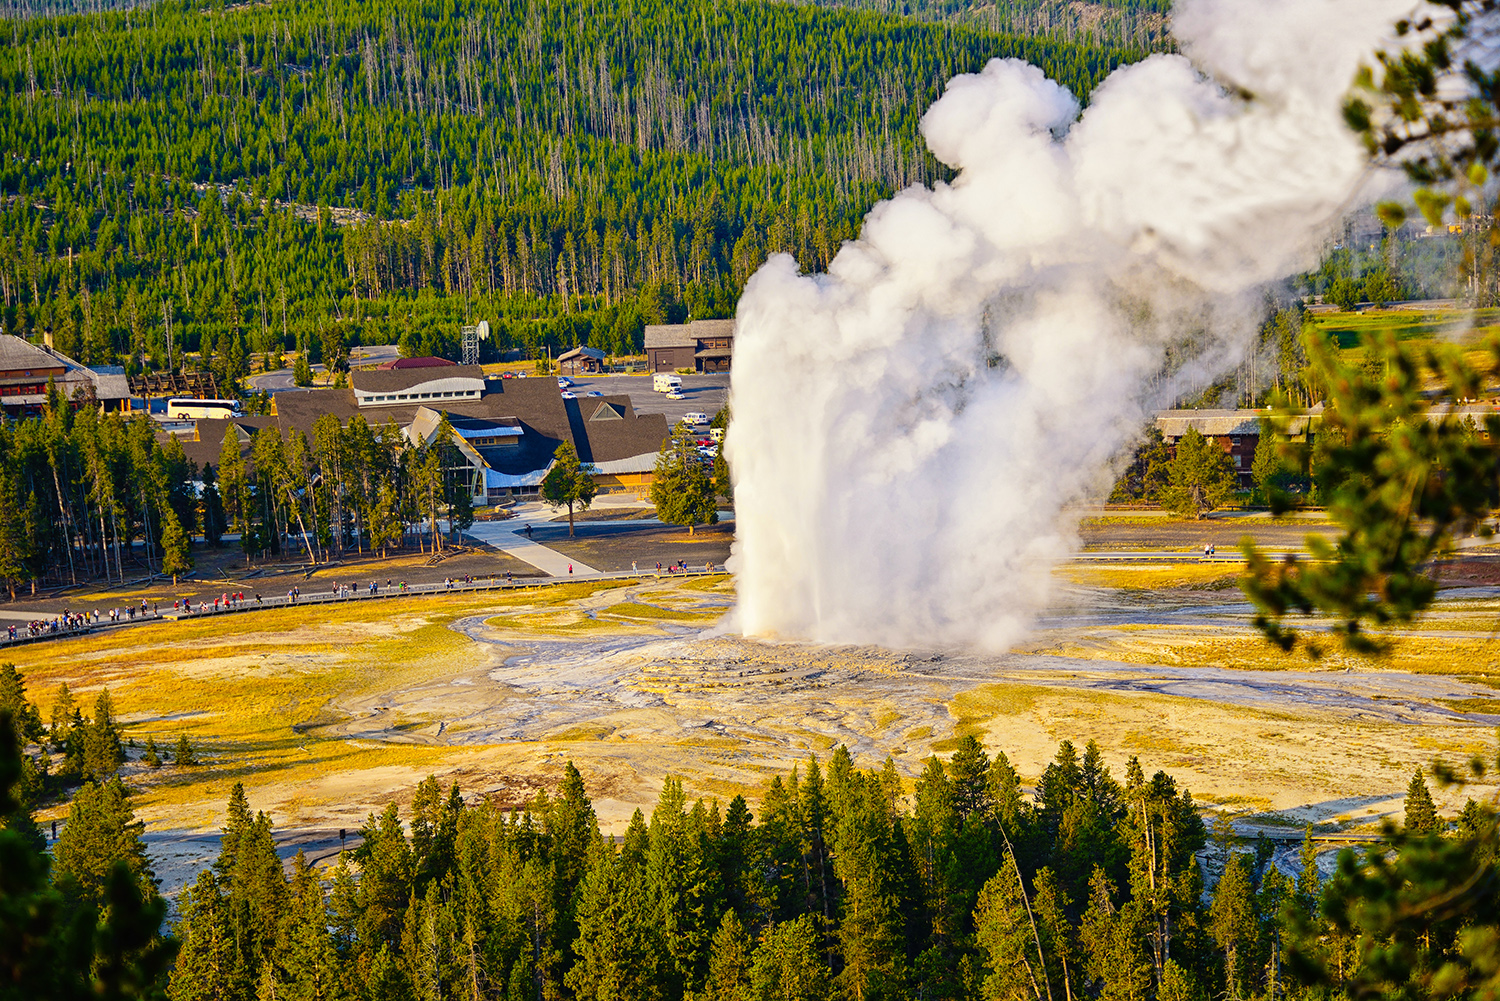 Old Faithful From Observation Point